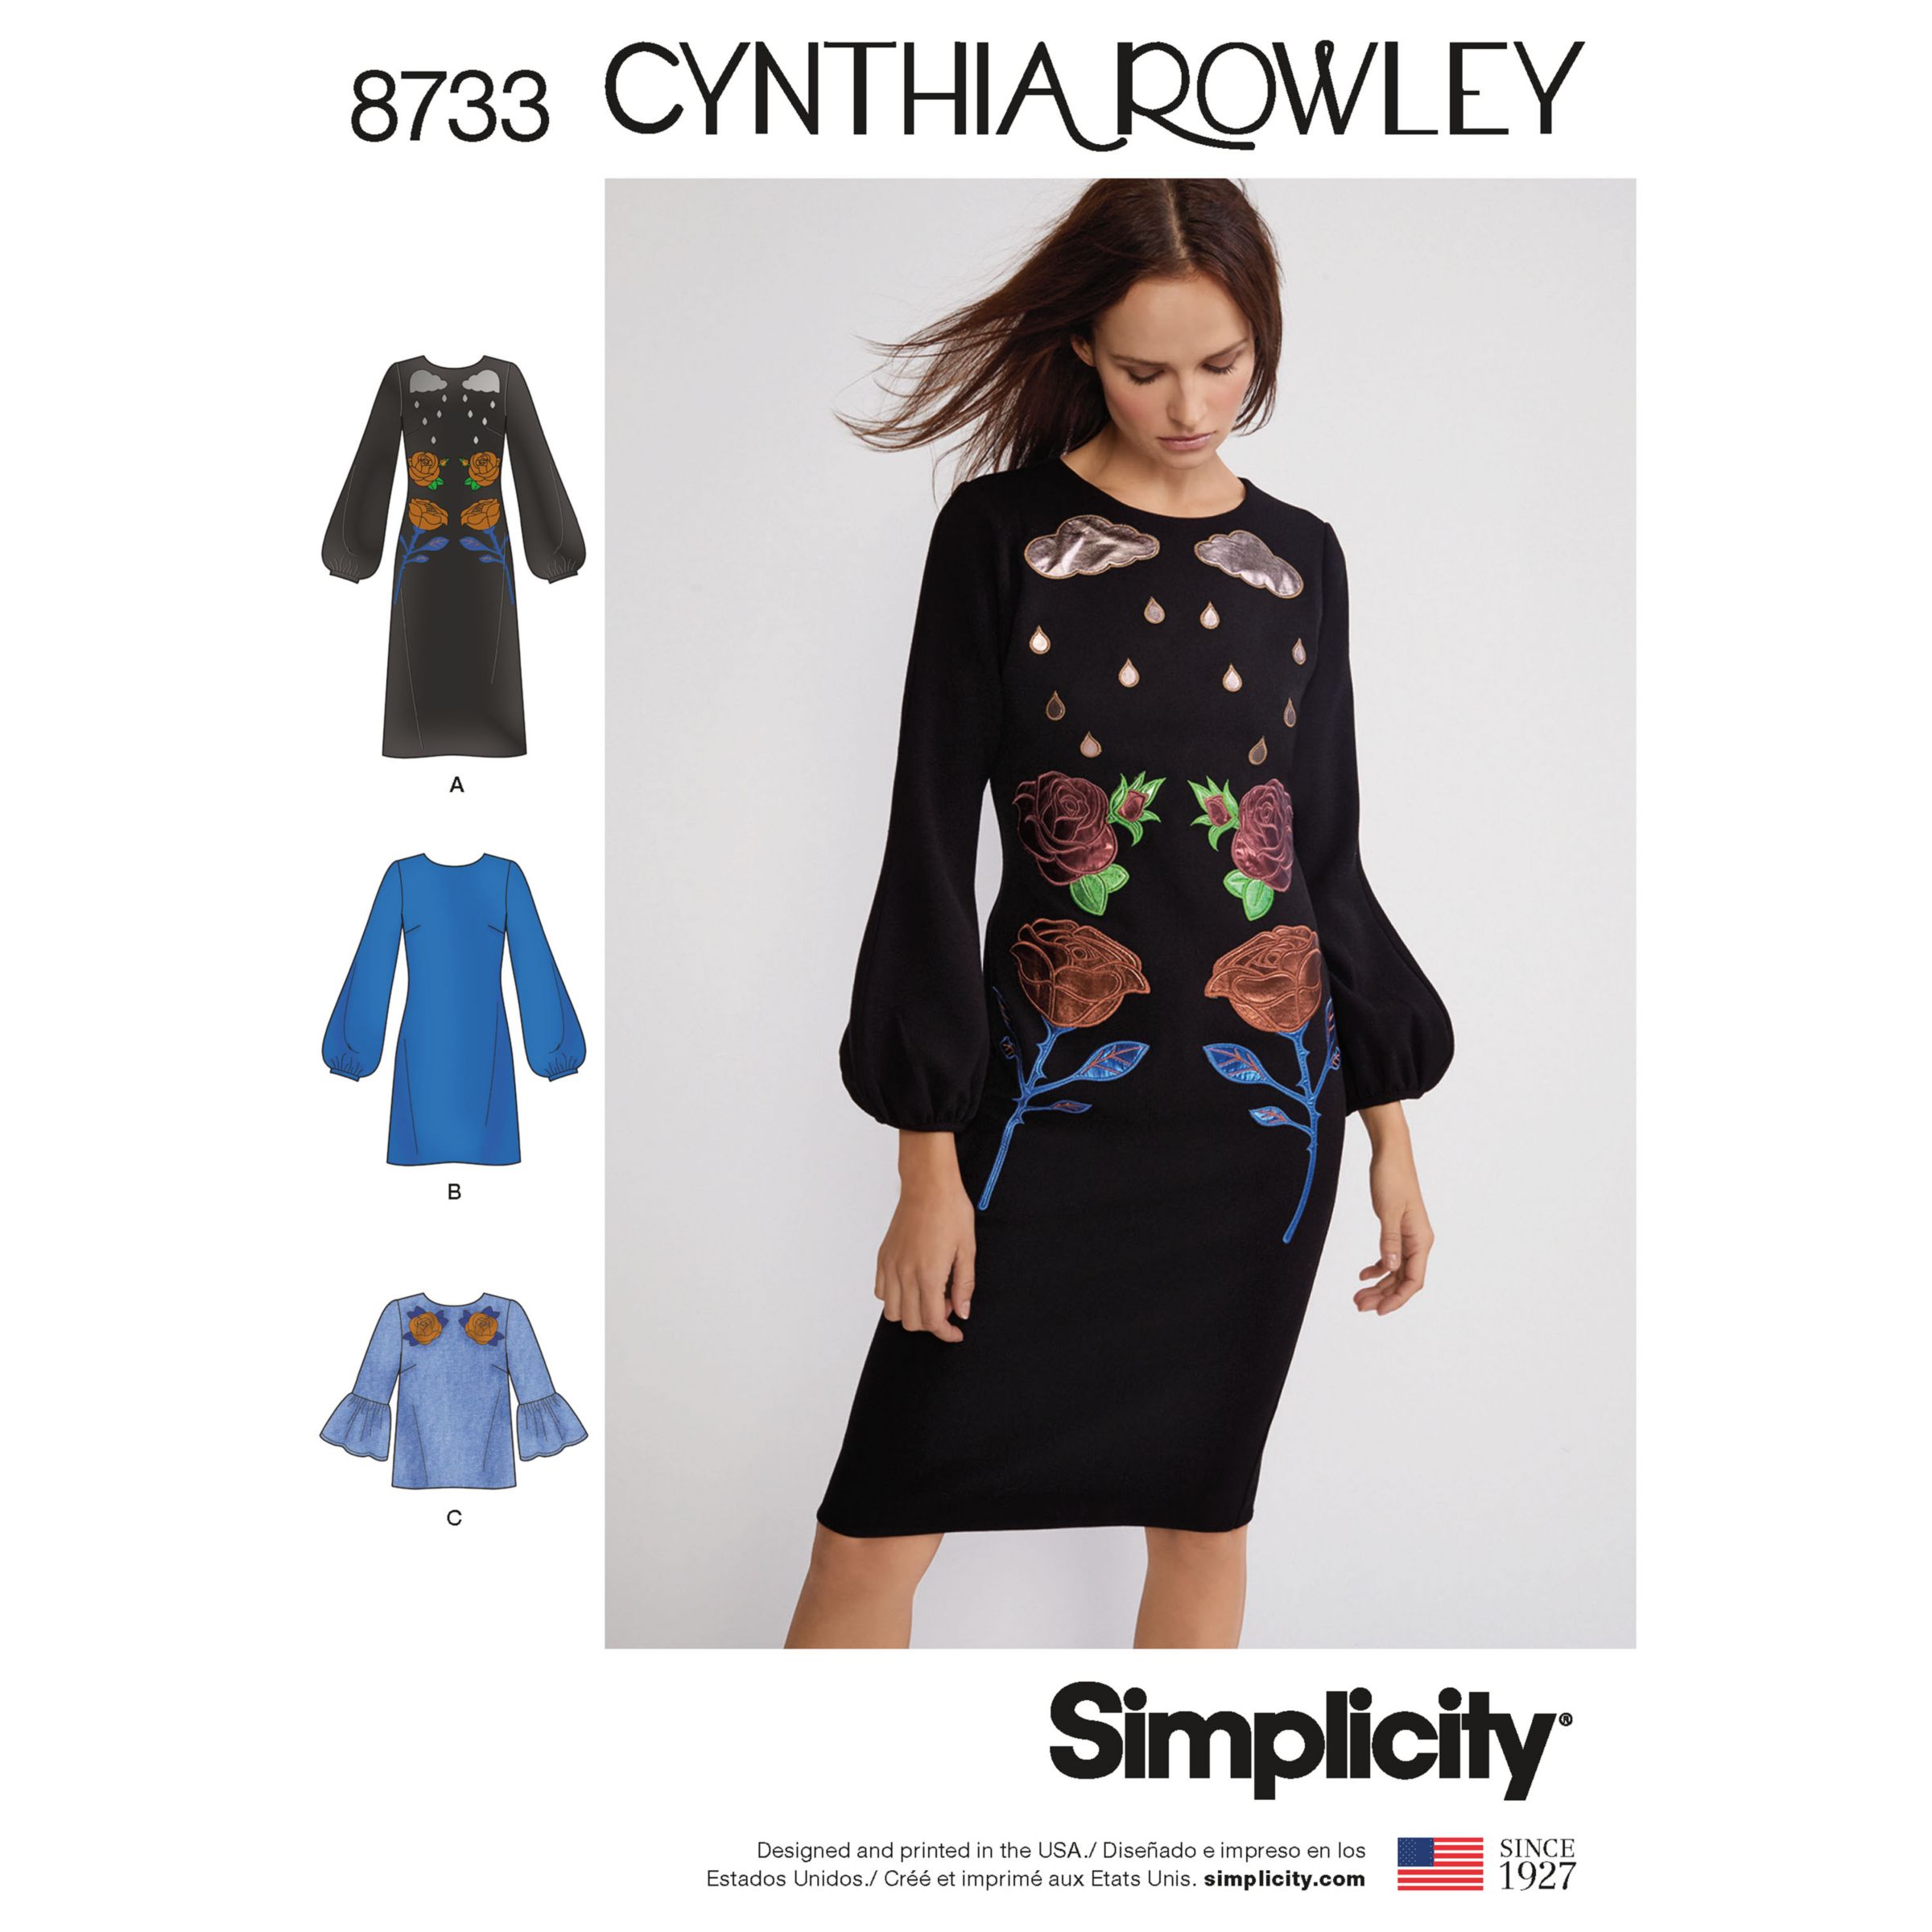 Simplicity 1104 Womens Tops and Bottoms Sewing Pattern Collection by Cynthia Rowley Sizes 6-14